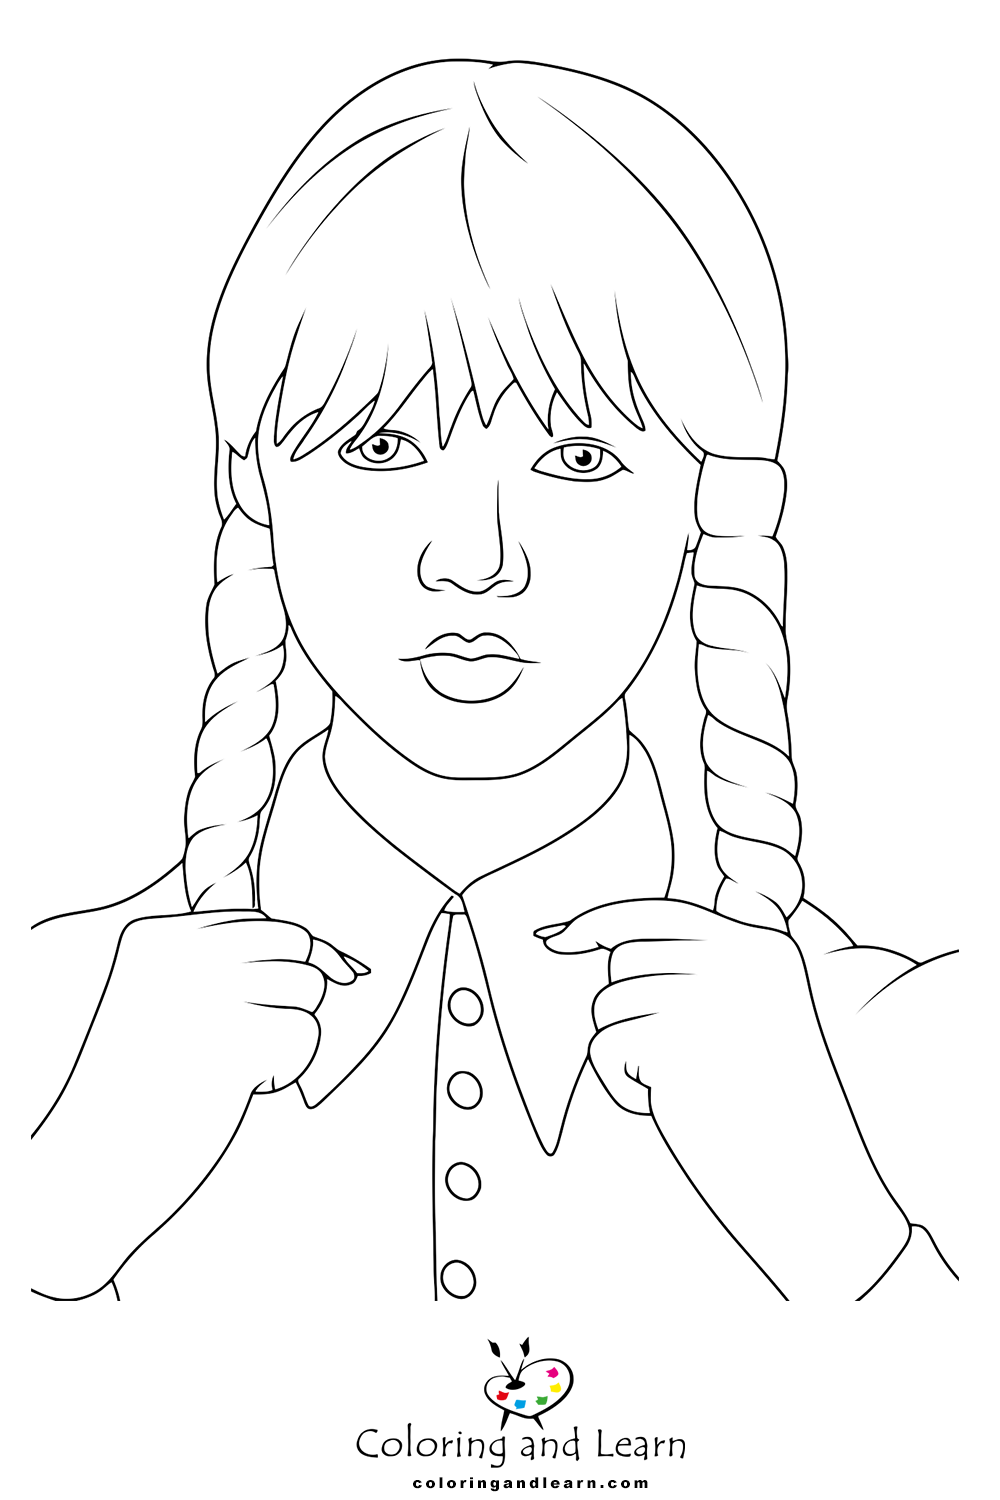 Wednesday Addams Coloring Pages : r/Wednesday